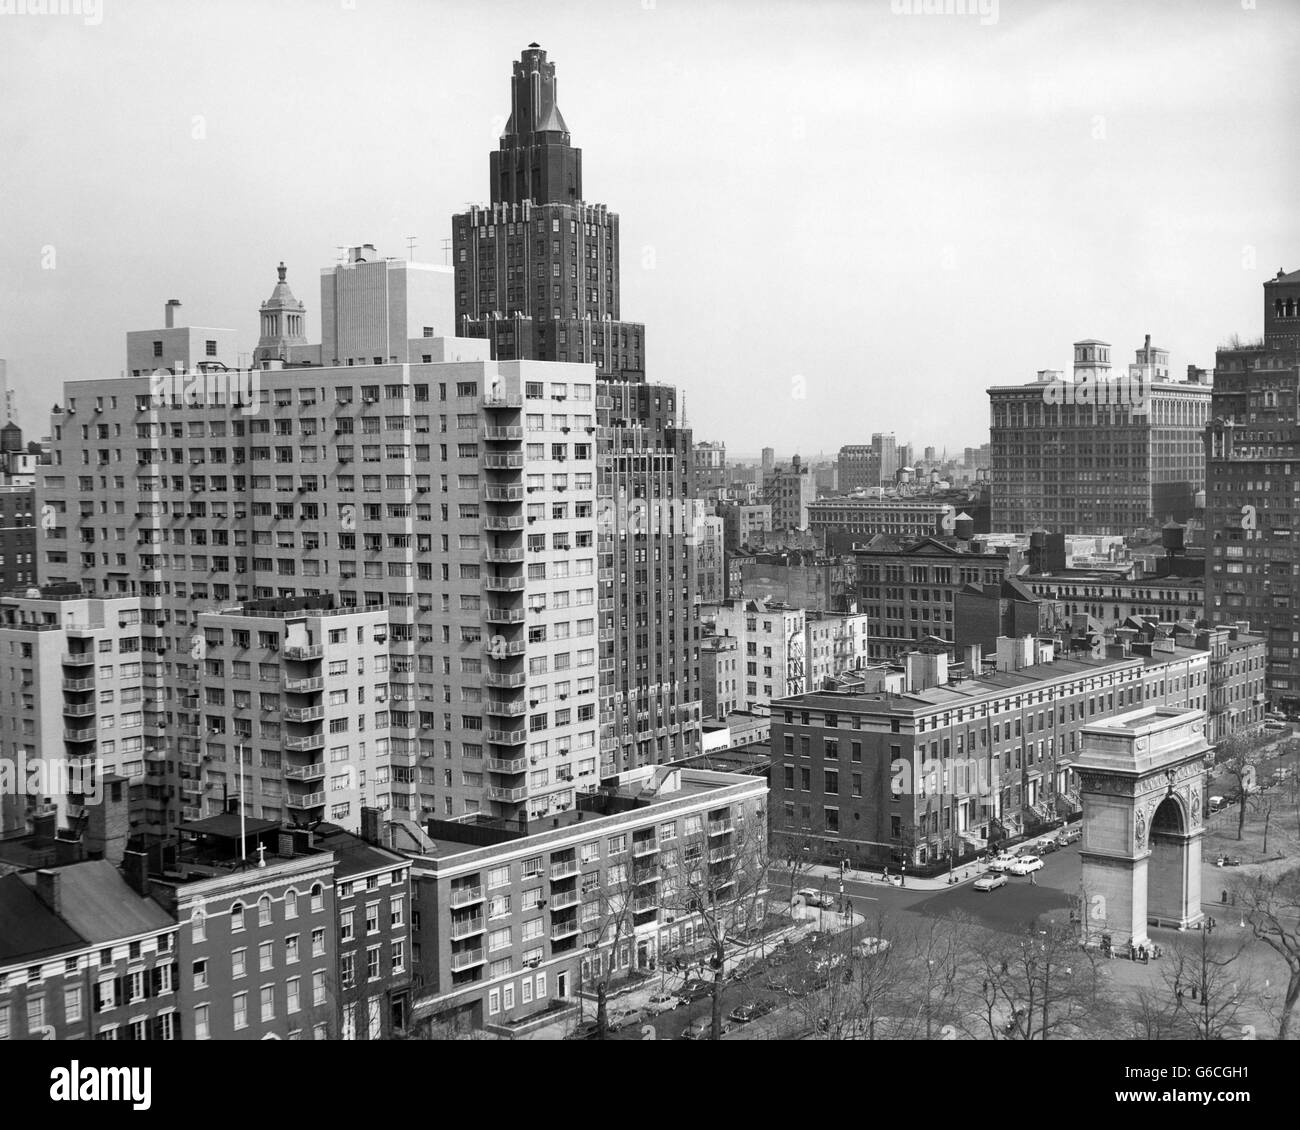 1950s VIEW WASHINGTON SQUARE NORTH WITH ARCH FIFTH AVENUE BUILDINGS NUMBER 1 & 2 OF WASHINGTON SQUARE PARK NEW YORK CITY NYC USA Stock Photo